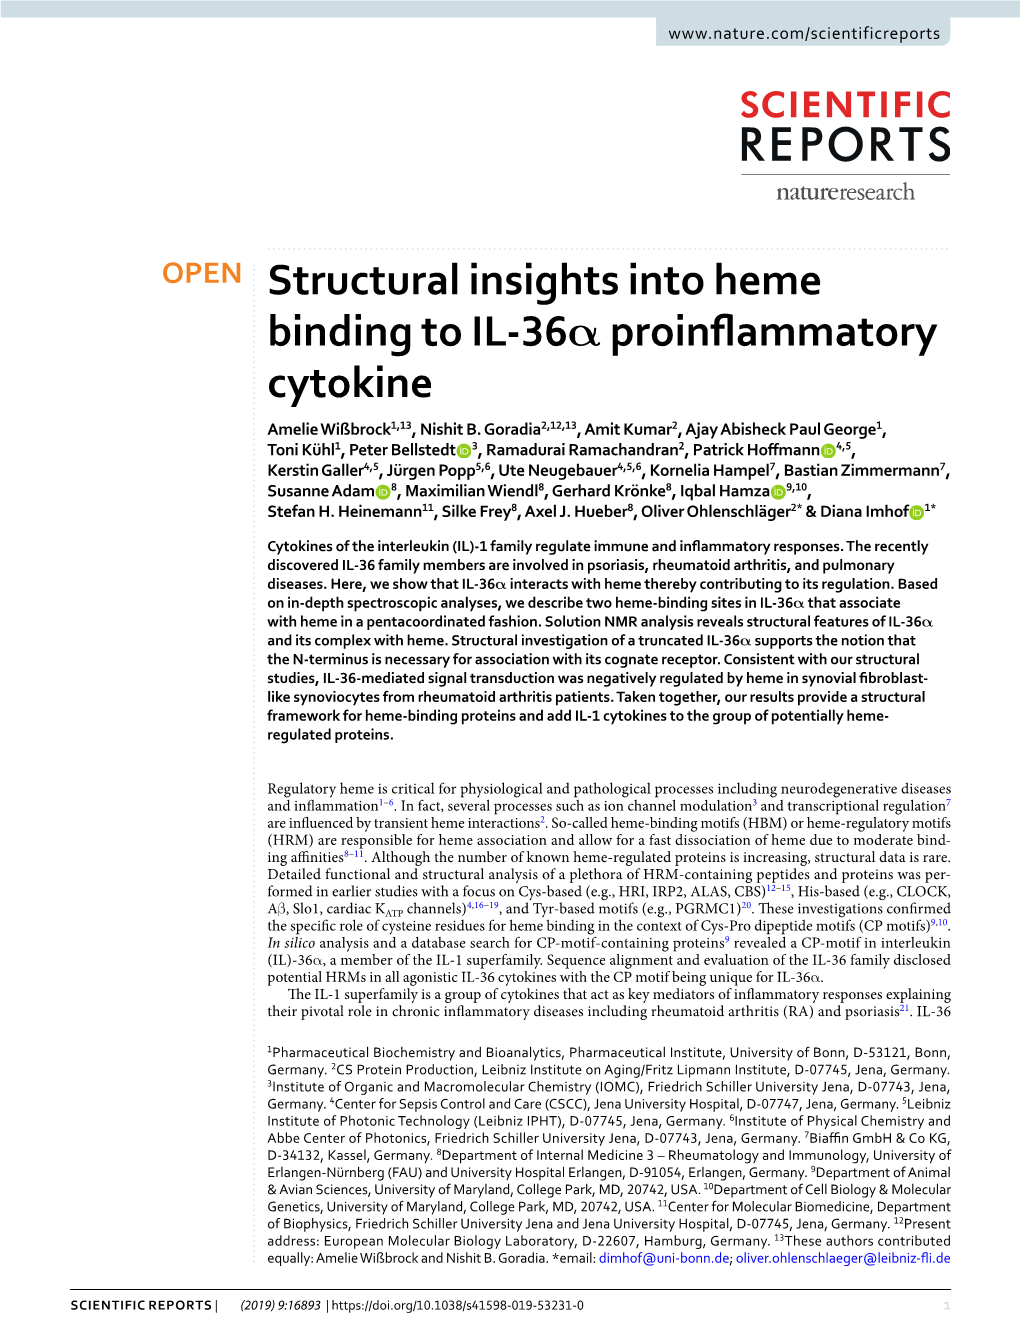 Structural Insights Into Heme Binding to IL-36Α Proinflammatory Cytokine